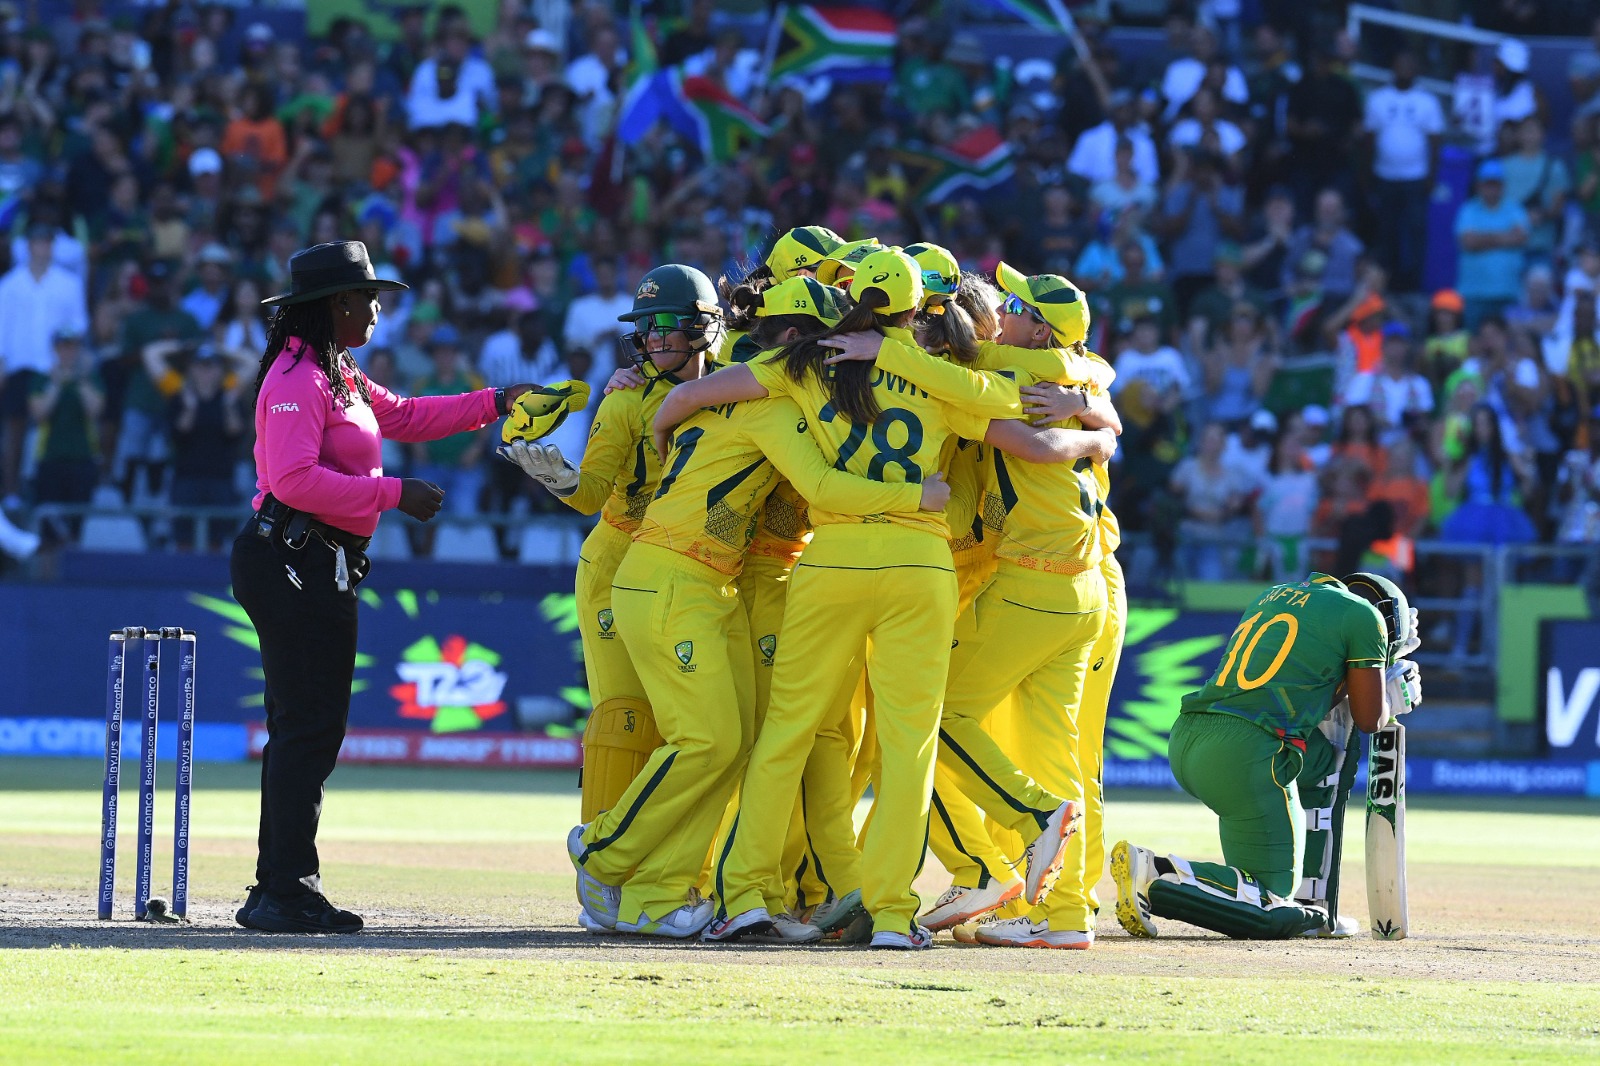 Women’s T20 World Cup champions